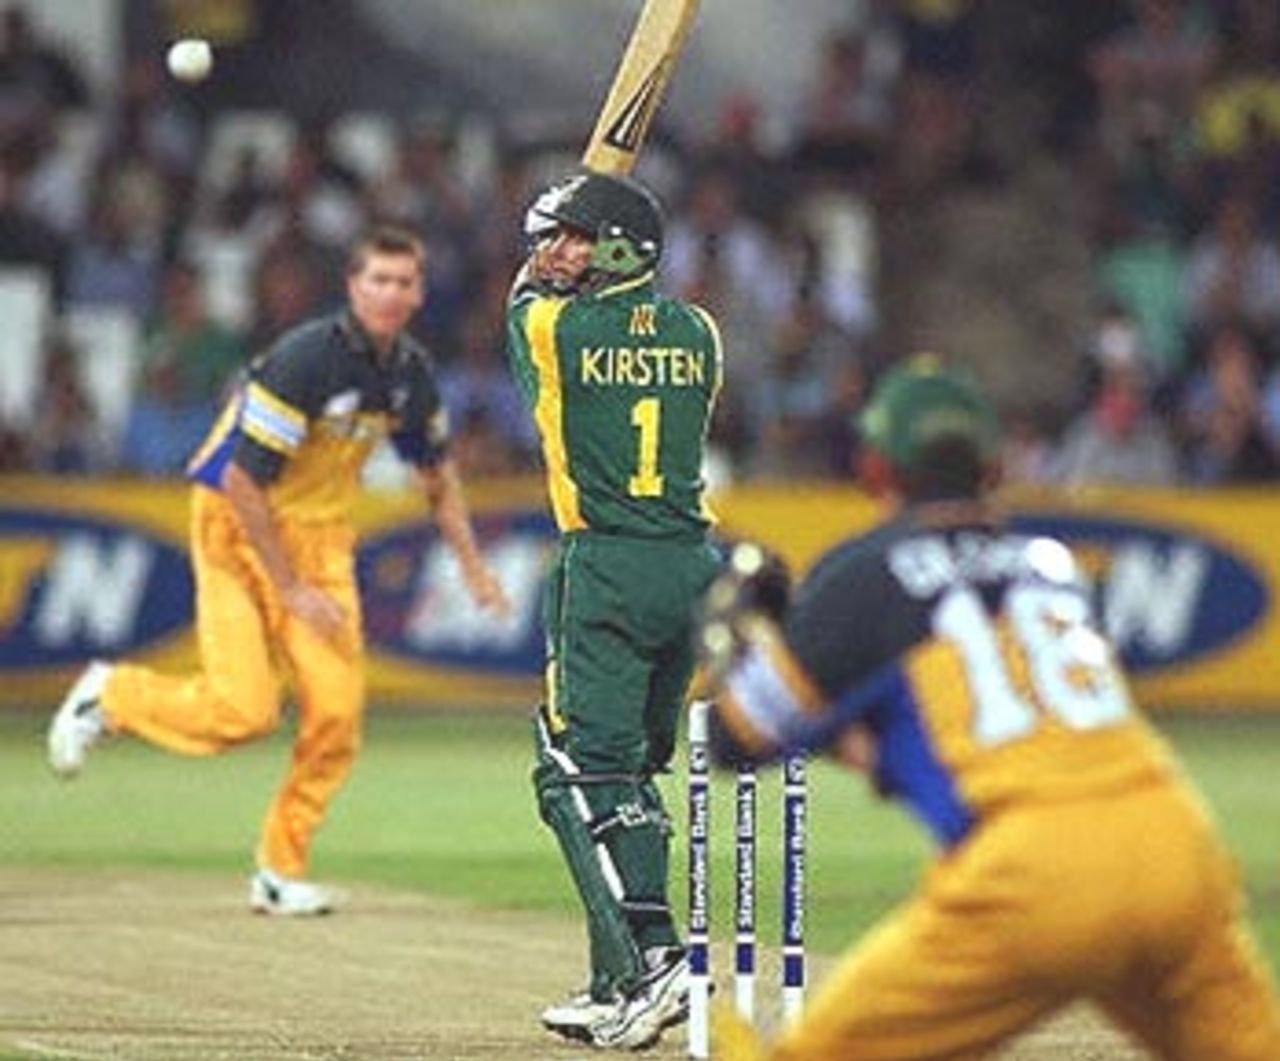 South African bowler Gary Kirsten (C) hits a ball from Glenn McGrath (L) of Australia during a one day internatonal match at the Kingsmead oval in Durban, 12 April 2000.